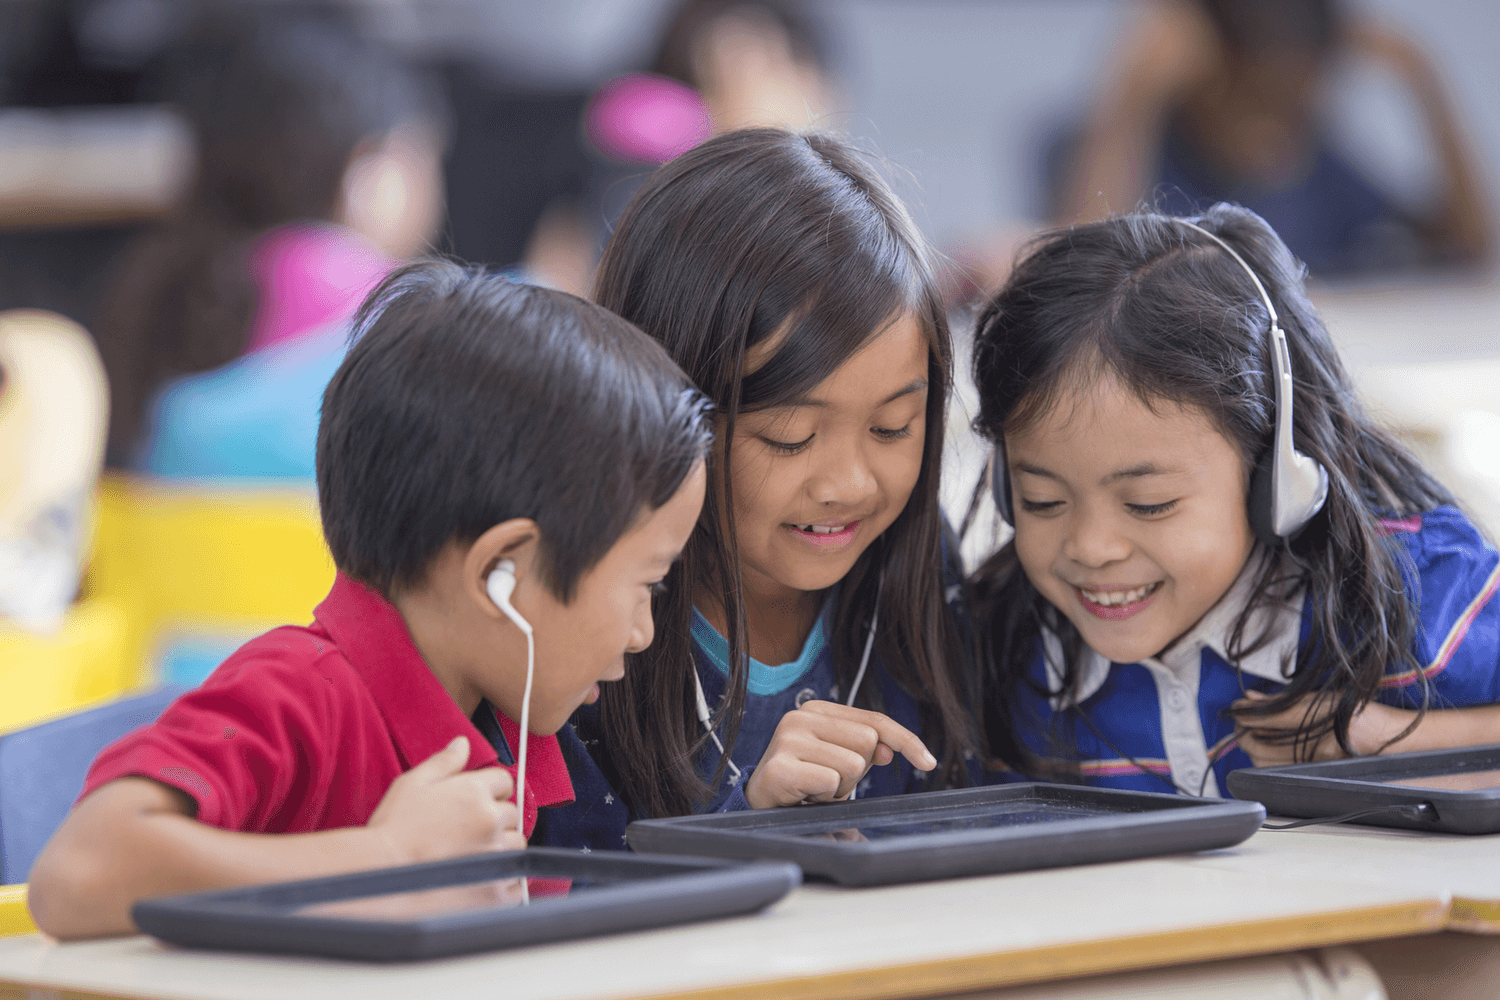 Students at desk with headphones and earbuds. School earbuds vs. school headphones – what’s the difference? Our article breaks down the five major factors to consider when purchasing new school headphones or headsets.